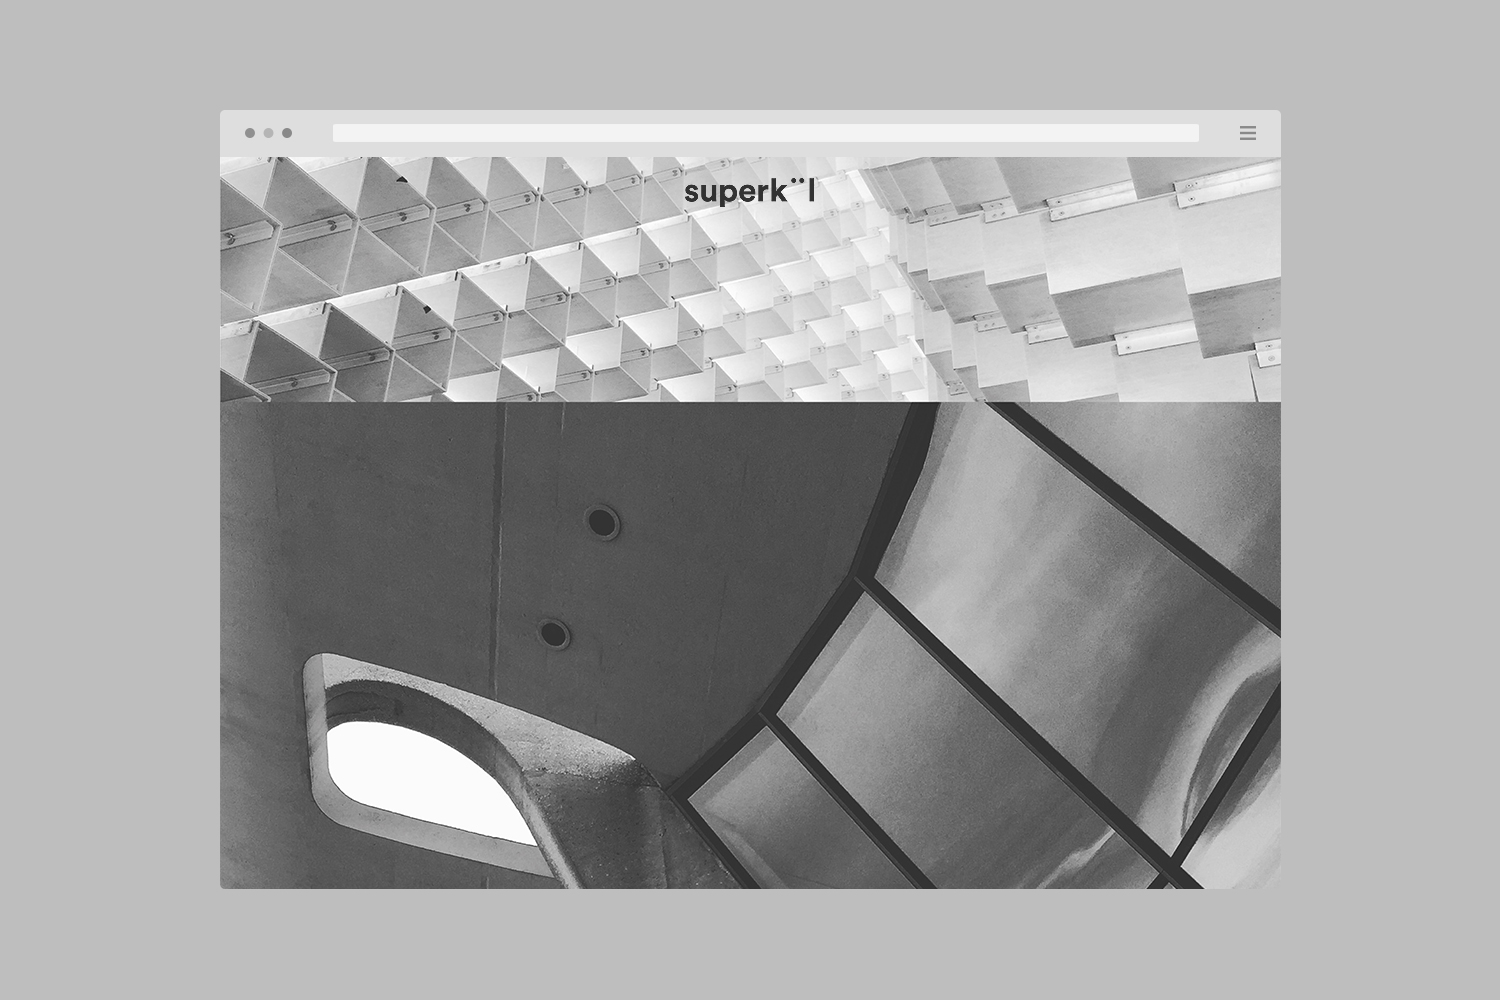 Brand identity and website by Toronto-based graphic design studio Blok for Canadian architecture firm Superkül